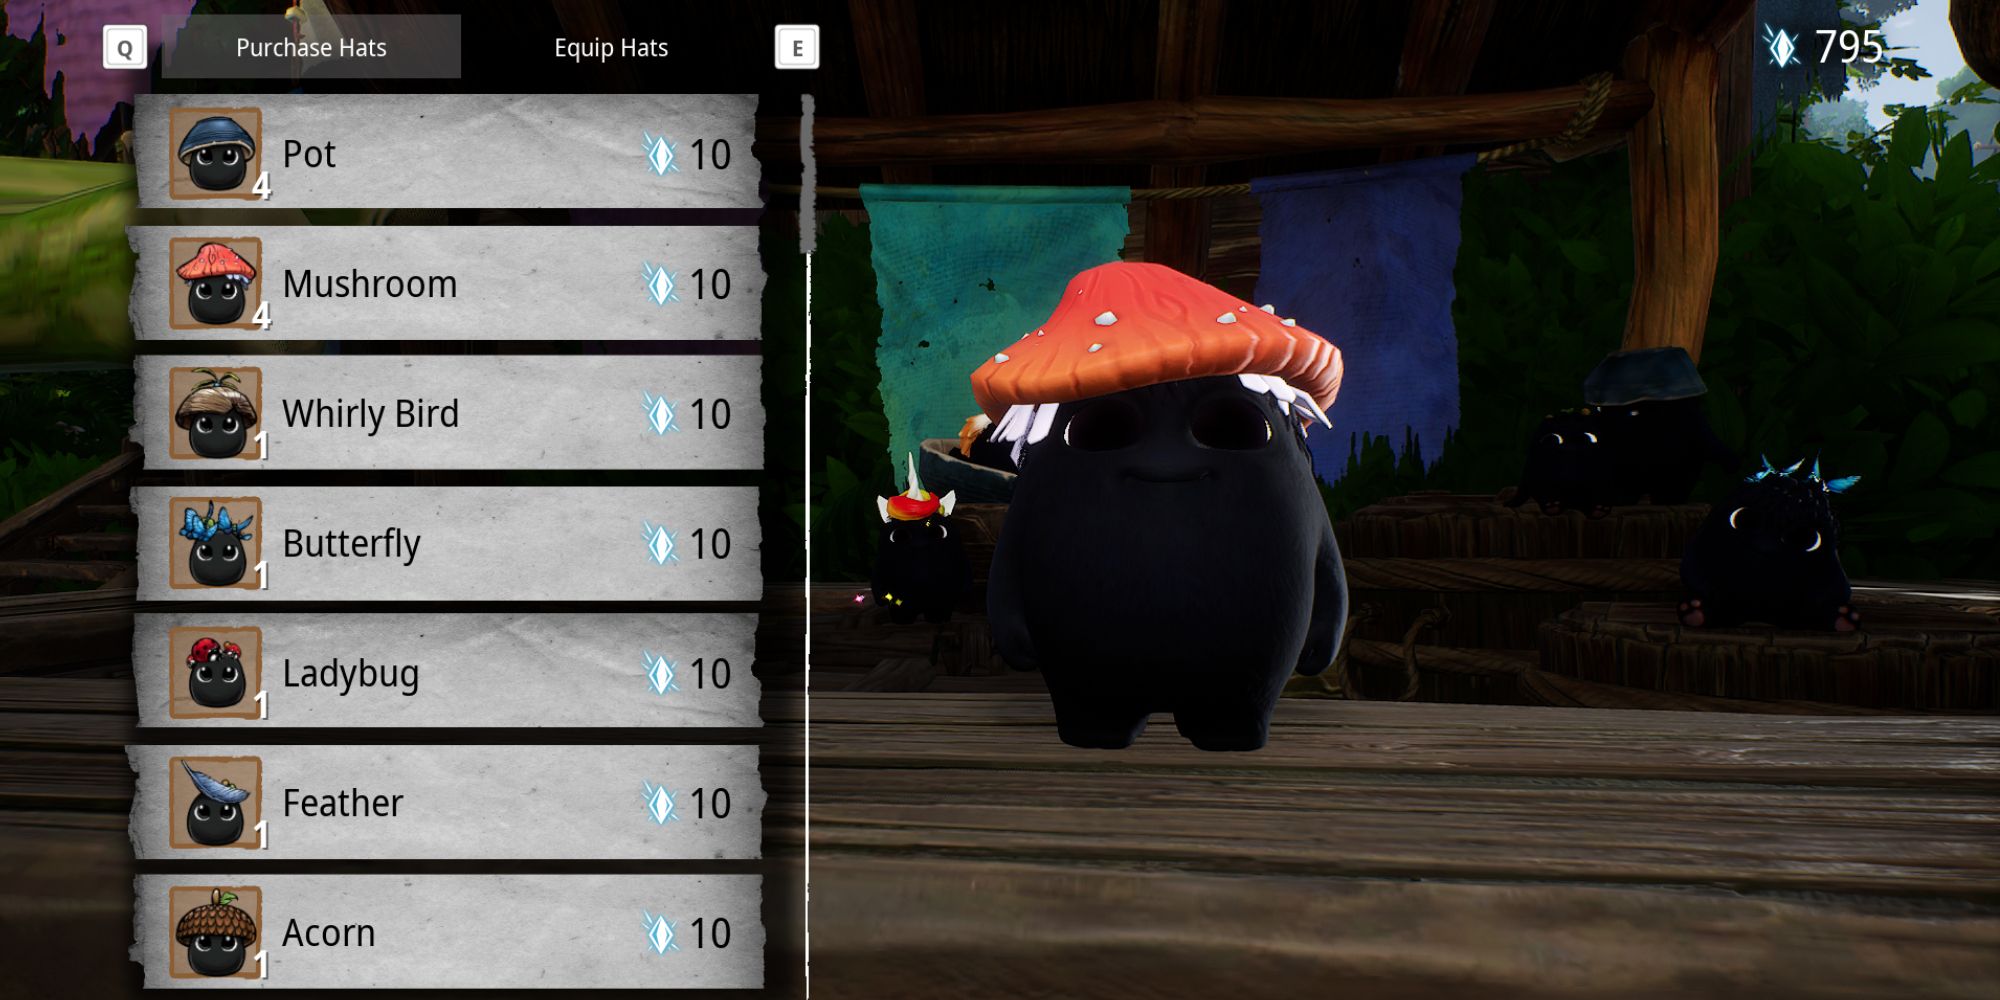 Kena Bridge of Spirits Rot wearing mushroom hat with menu of available hats and their prices next to it